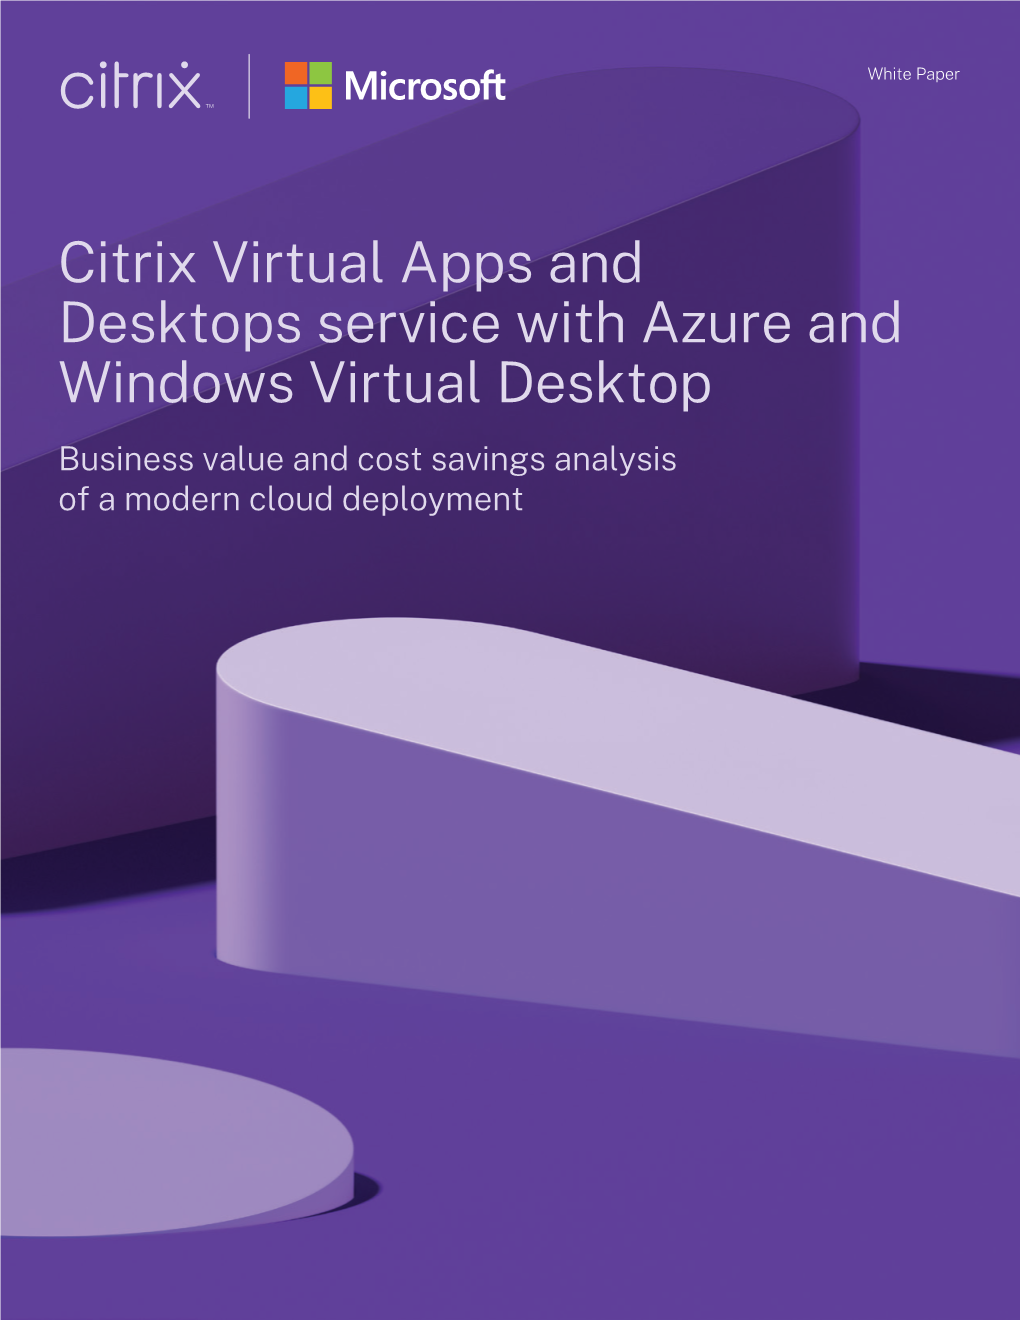 Citrix Virtual Apps and Desktops Service with Azure and Windows Virtual Desktop Business Value and Cost Savings Analysis of a Modern Cloud Deployment